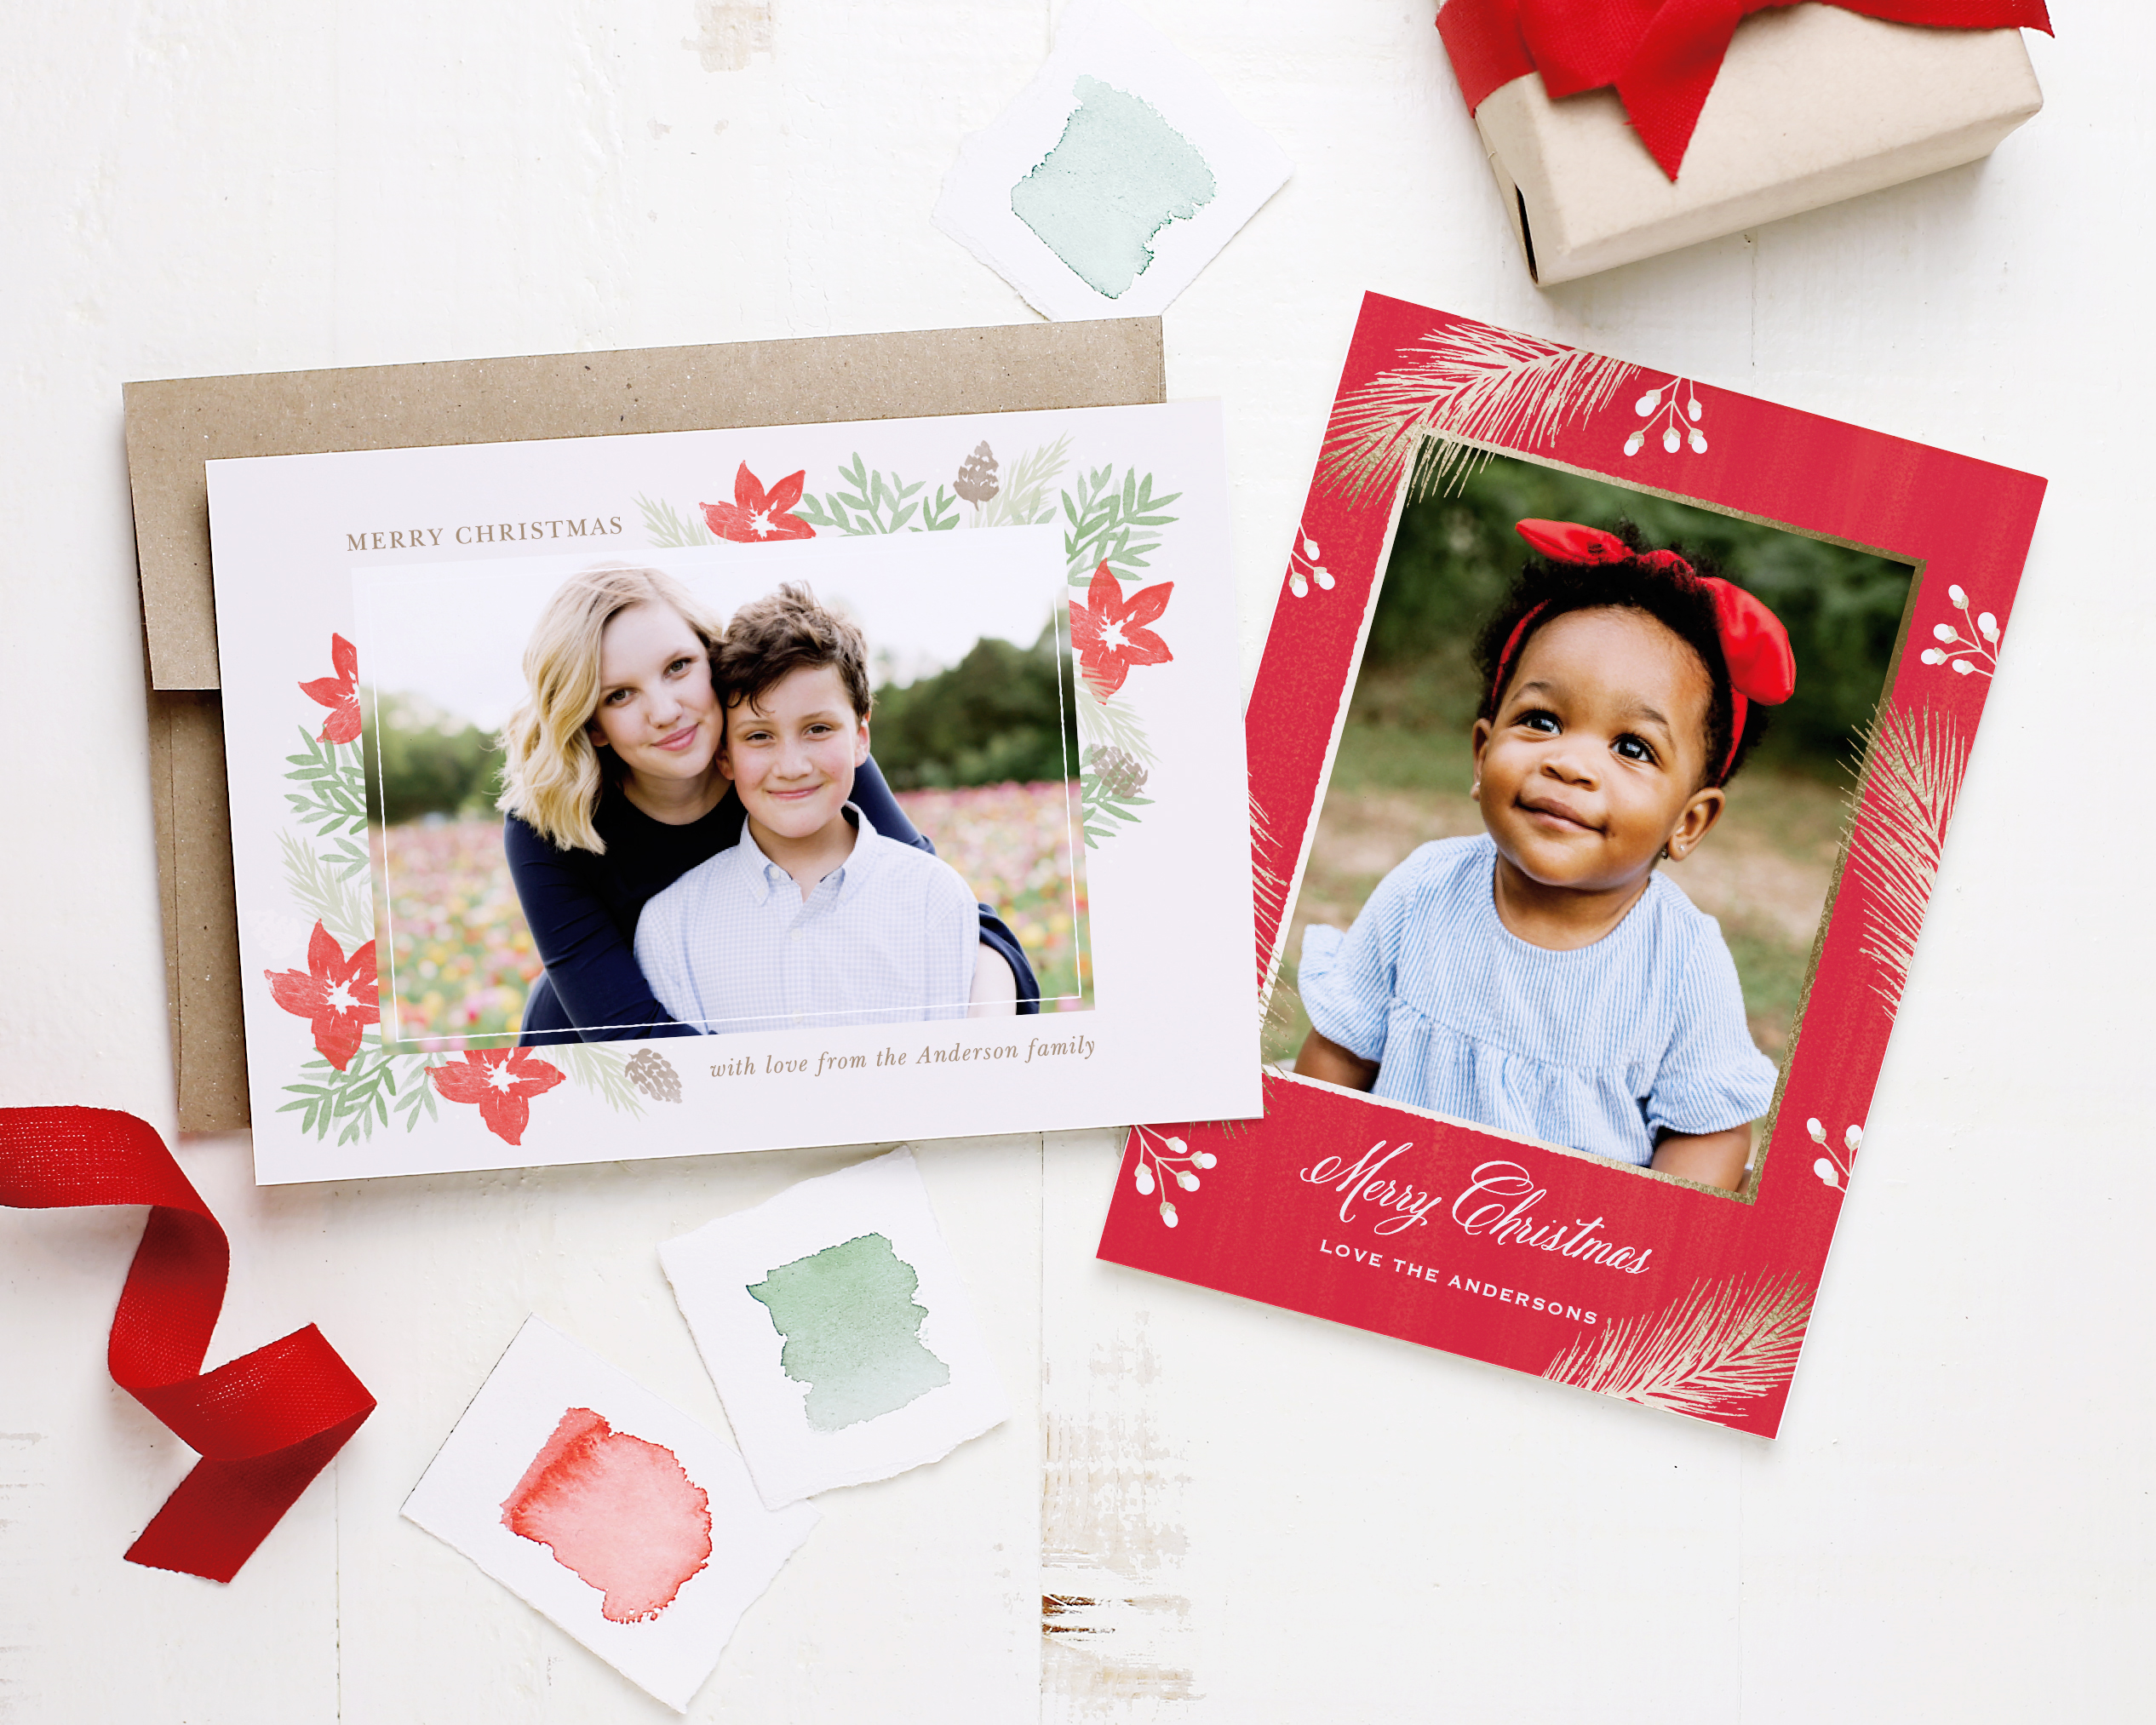 Order your holiday photo Christmas cards with Basic Invite!